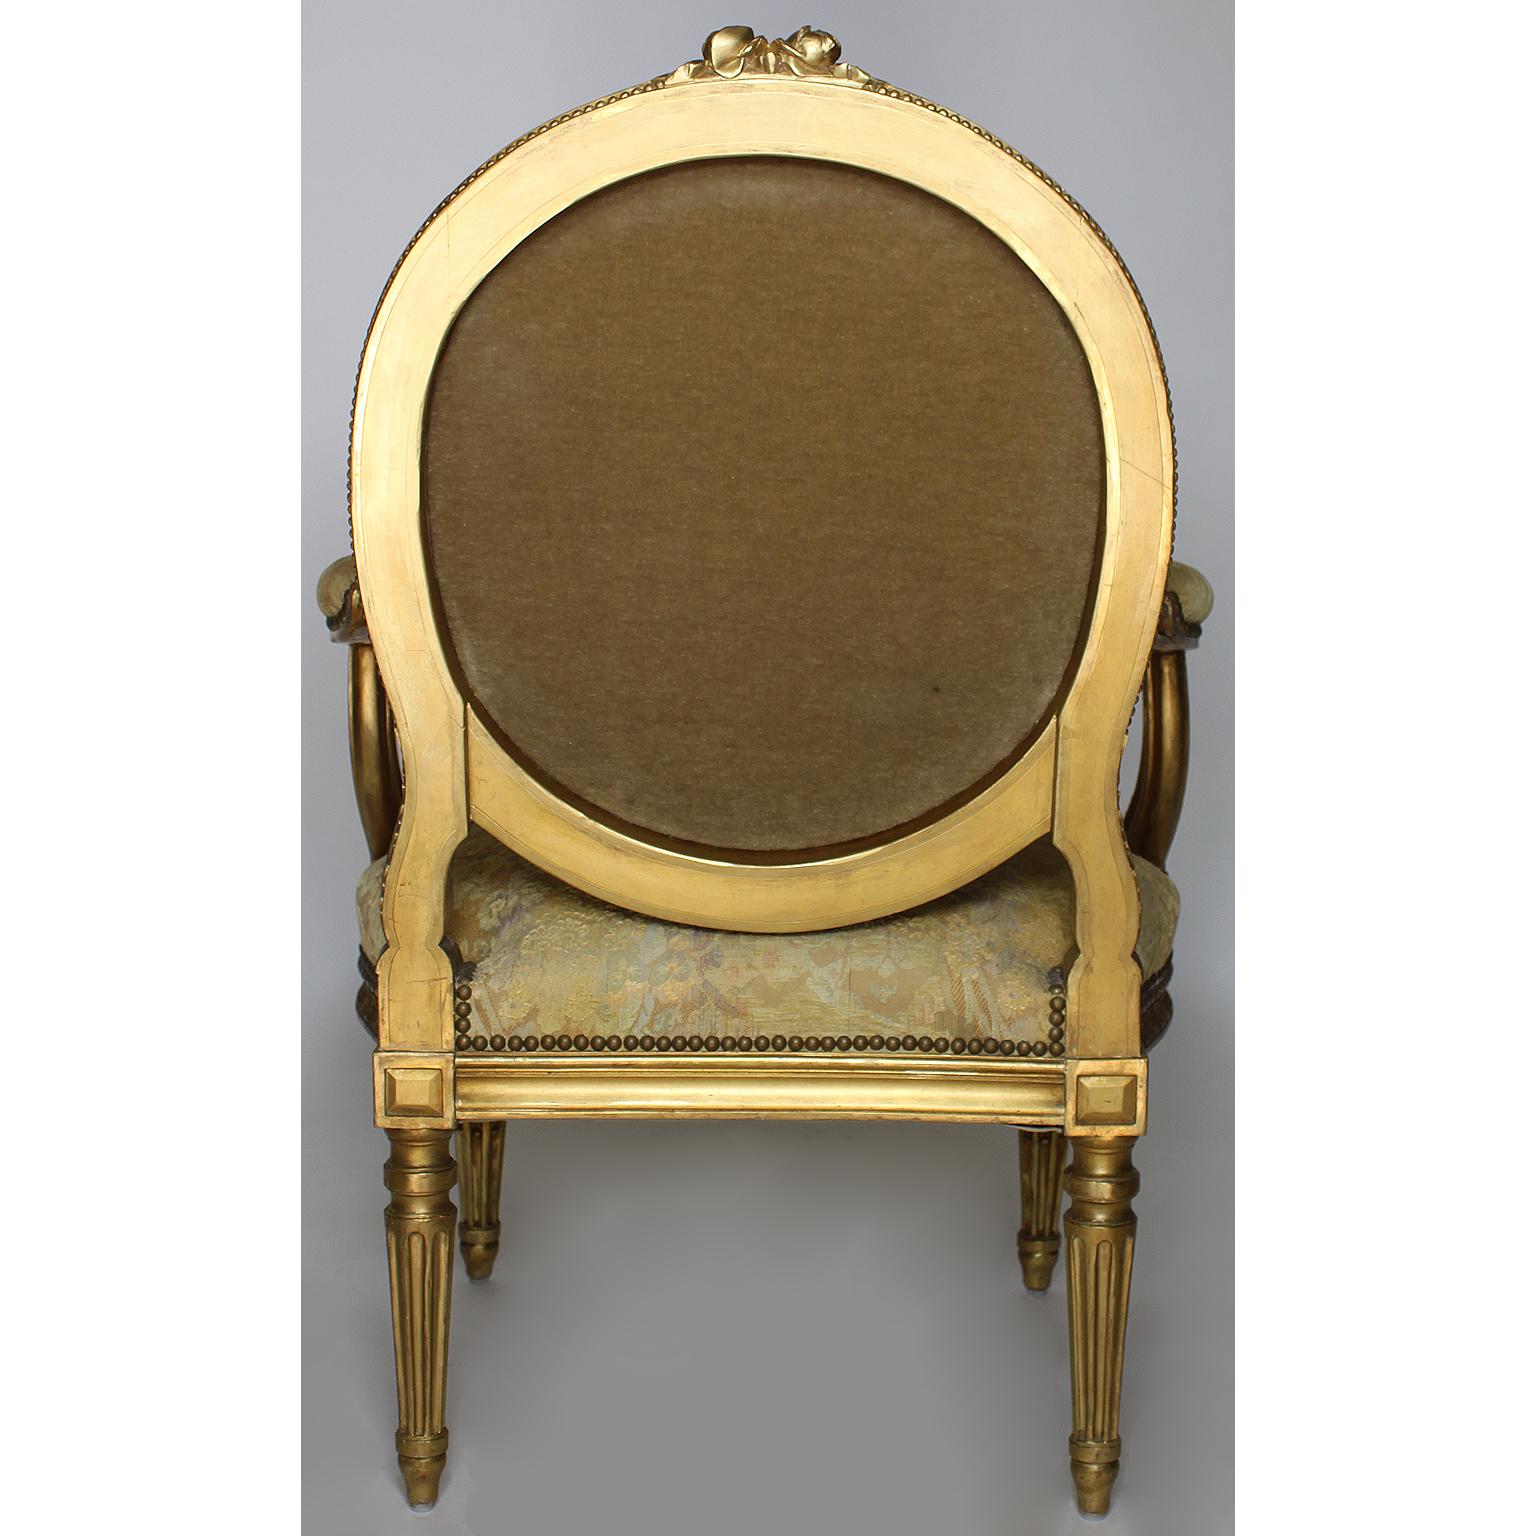 Fine French 19th Century Louis XVI Style Giltwood Carved Five-Piece Salon Suite For Sale 10